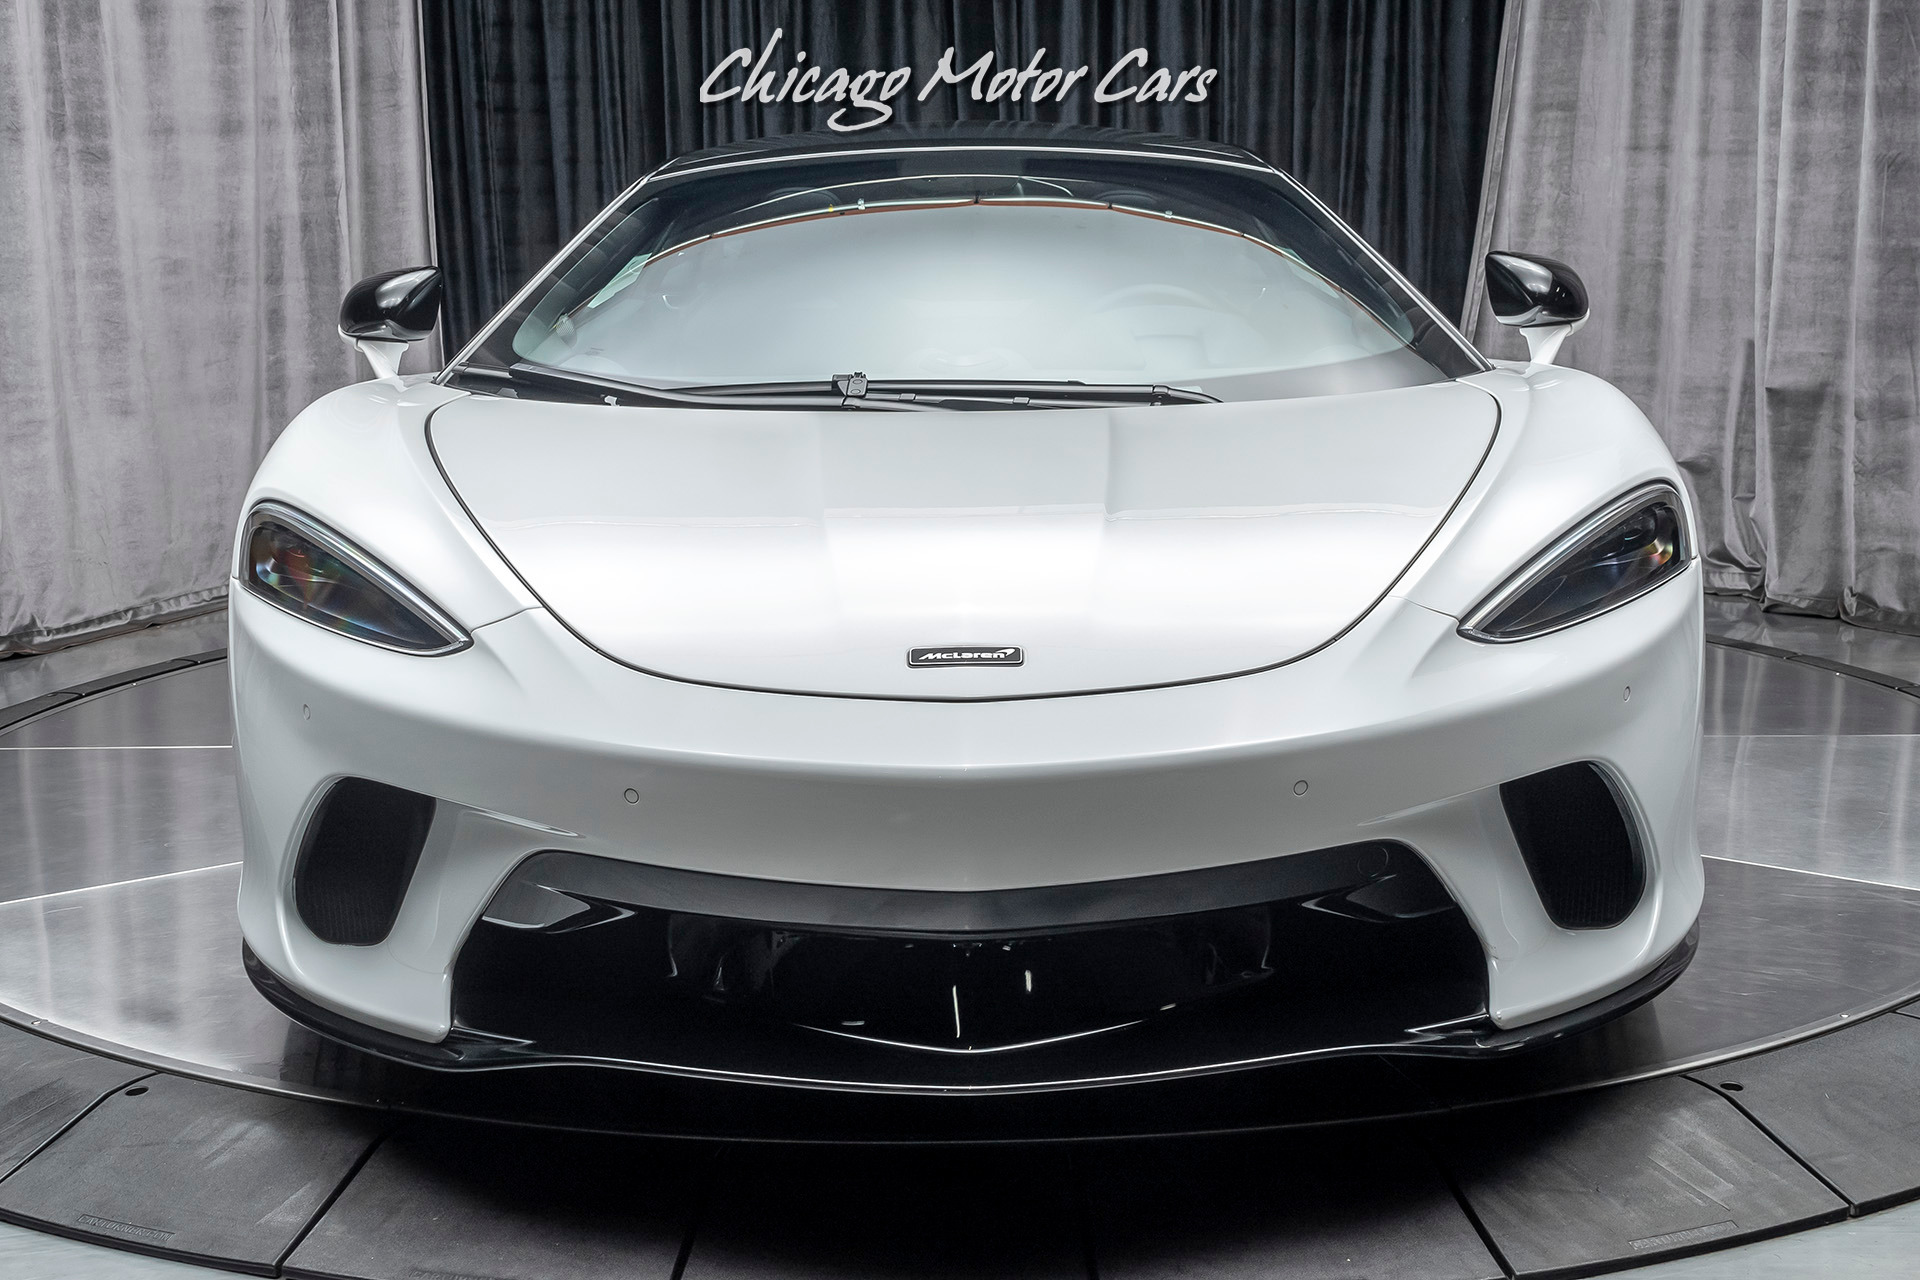 Used 2020 McLaren GT P22 Luxe Coupe - Original MSRP $243k+ ONLY 160 MILES!  PREMIUM PACK! For Sale (Special Pricing)